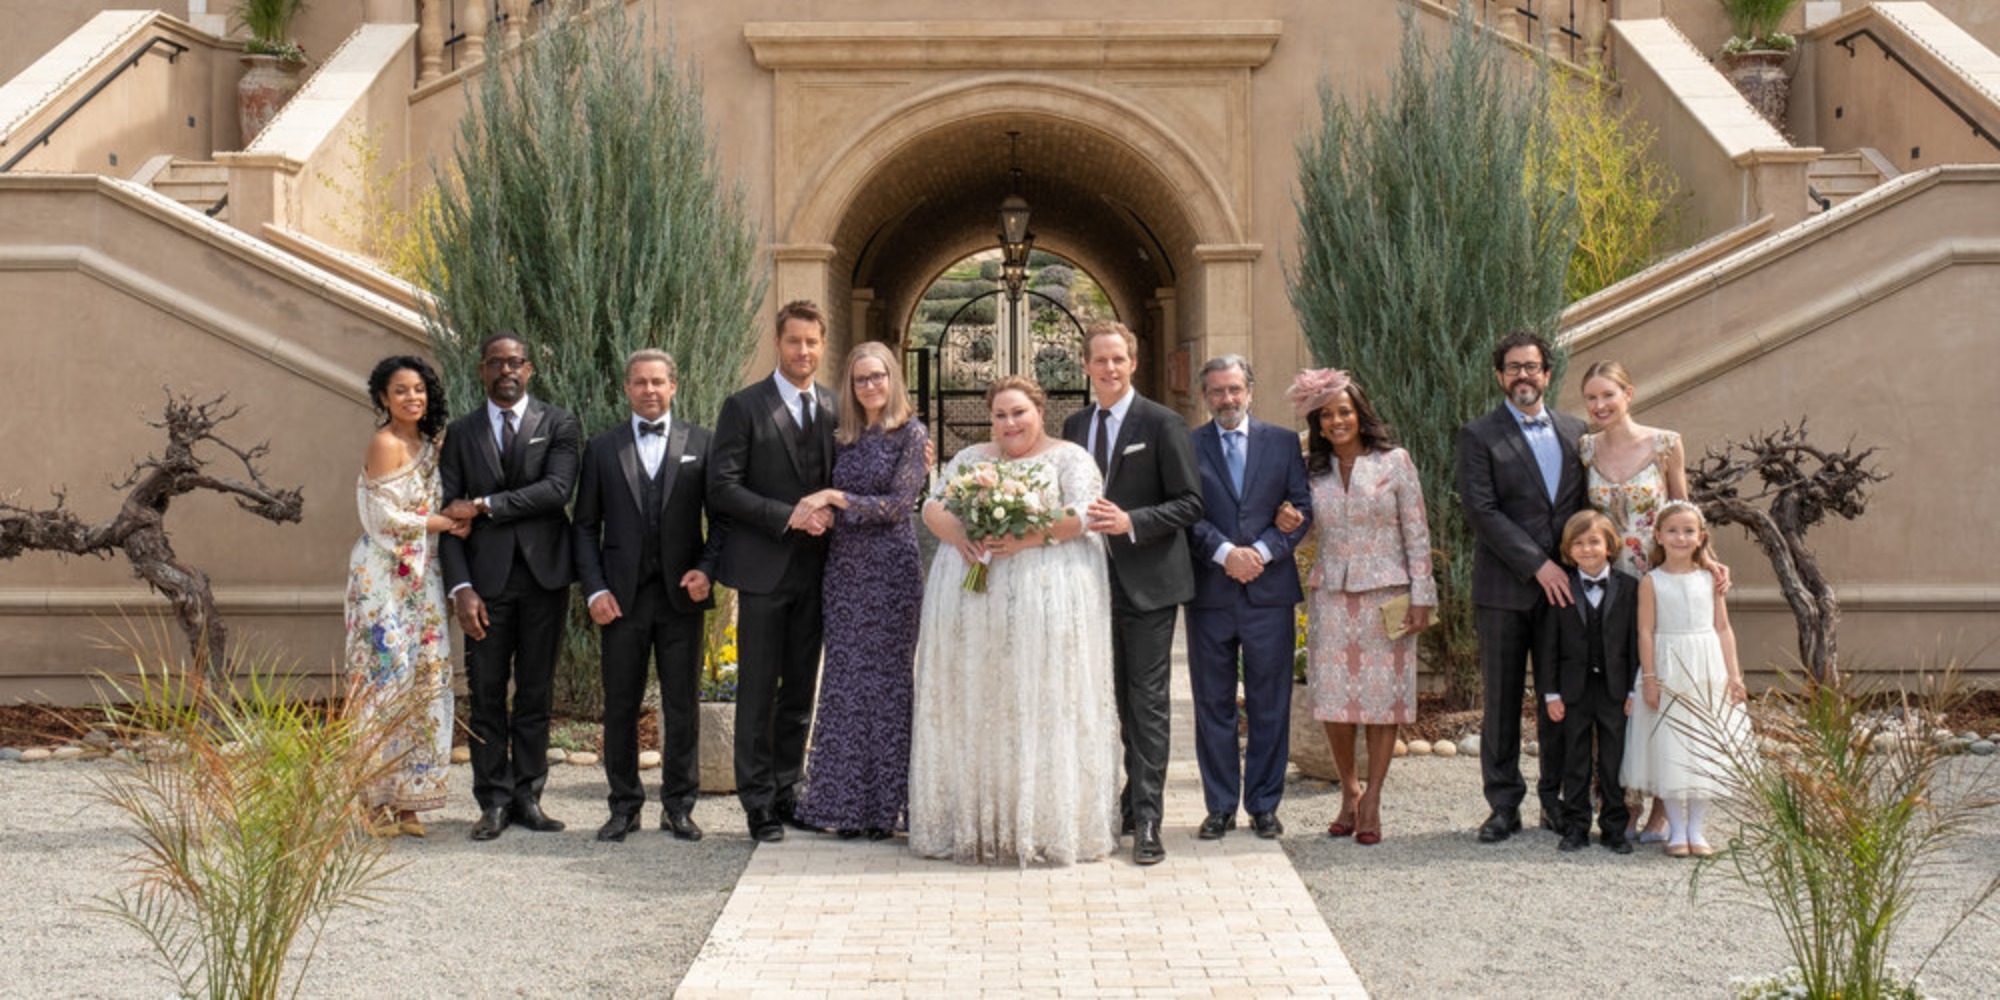 A 'This Is Us' cast photo taken during season 6 at Kate's wedding to Phillip.